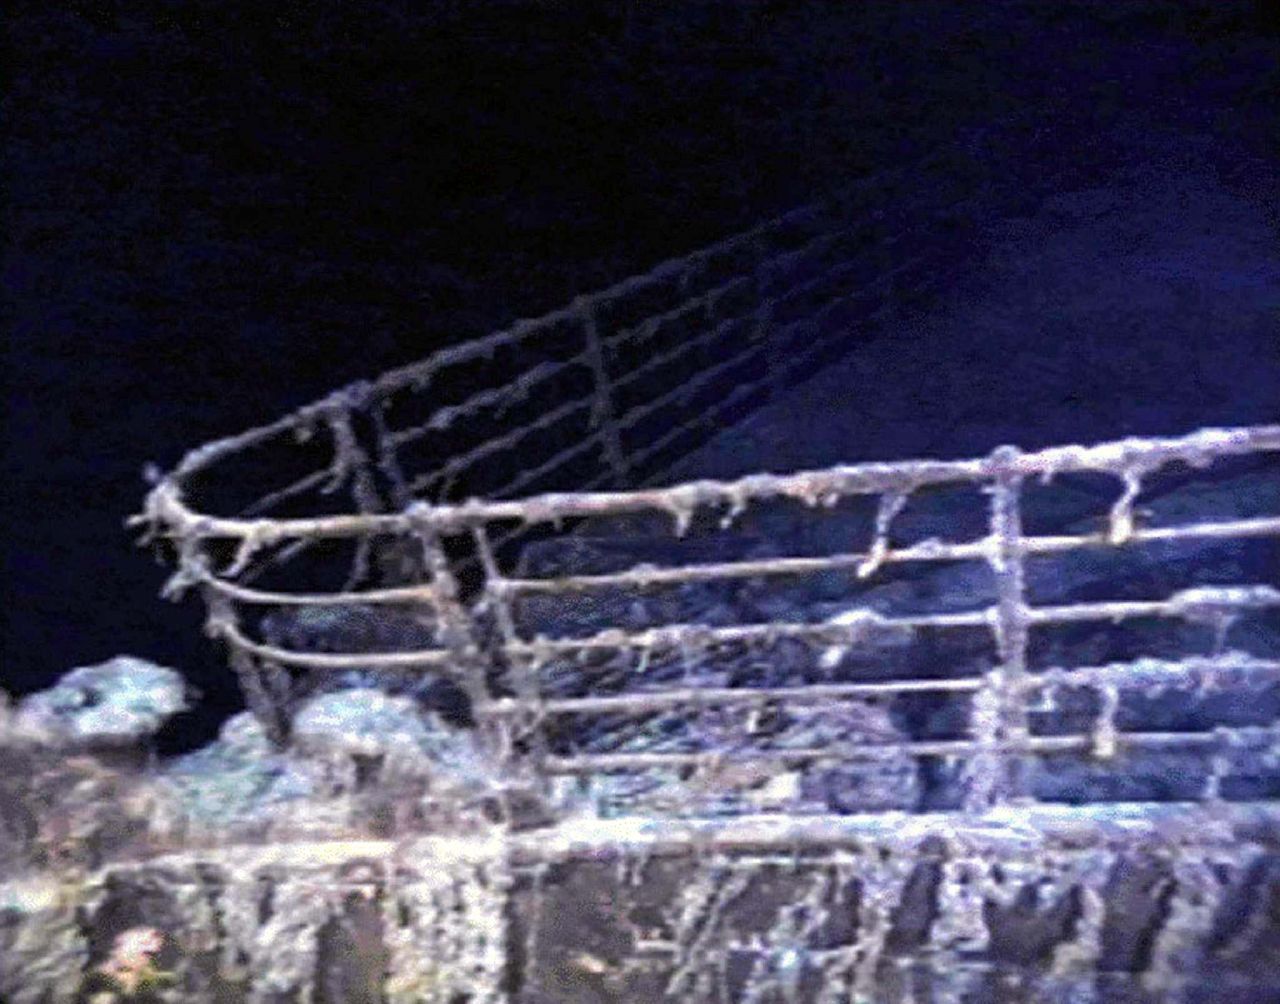 The port bow railing of the RMS Titanic, as pictured during an expedition to the wreck in 1996.